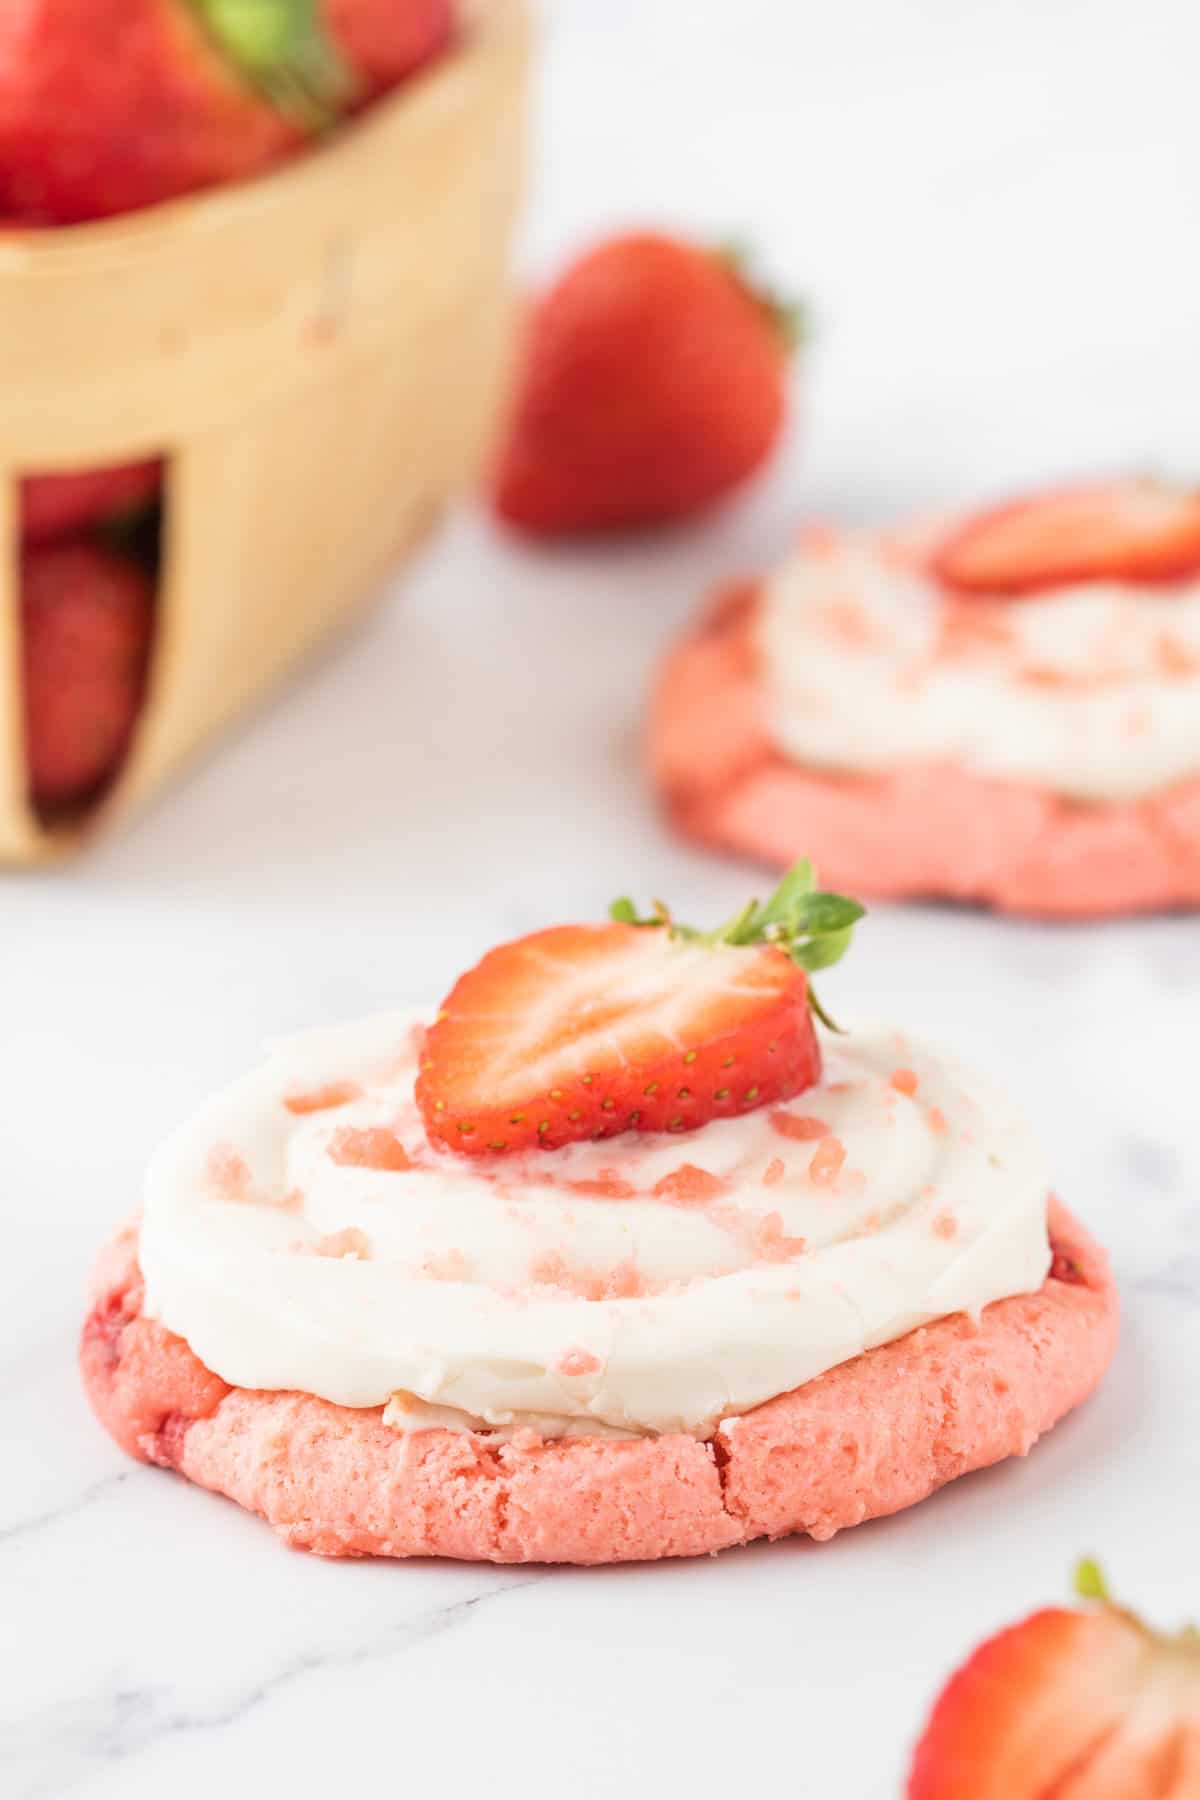 Strawberry Cheesecake Cookies are simple and delicious cookies made with boxed strawberry cake mix and fresh chopped strawberries, topped with a homemade cream cheese frosting.